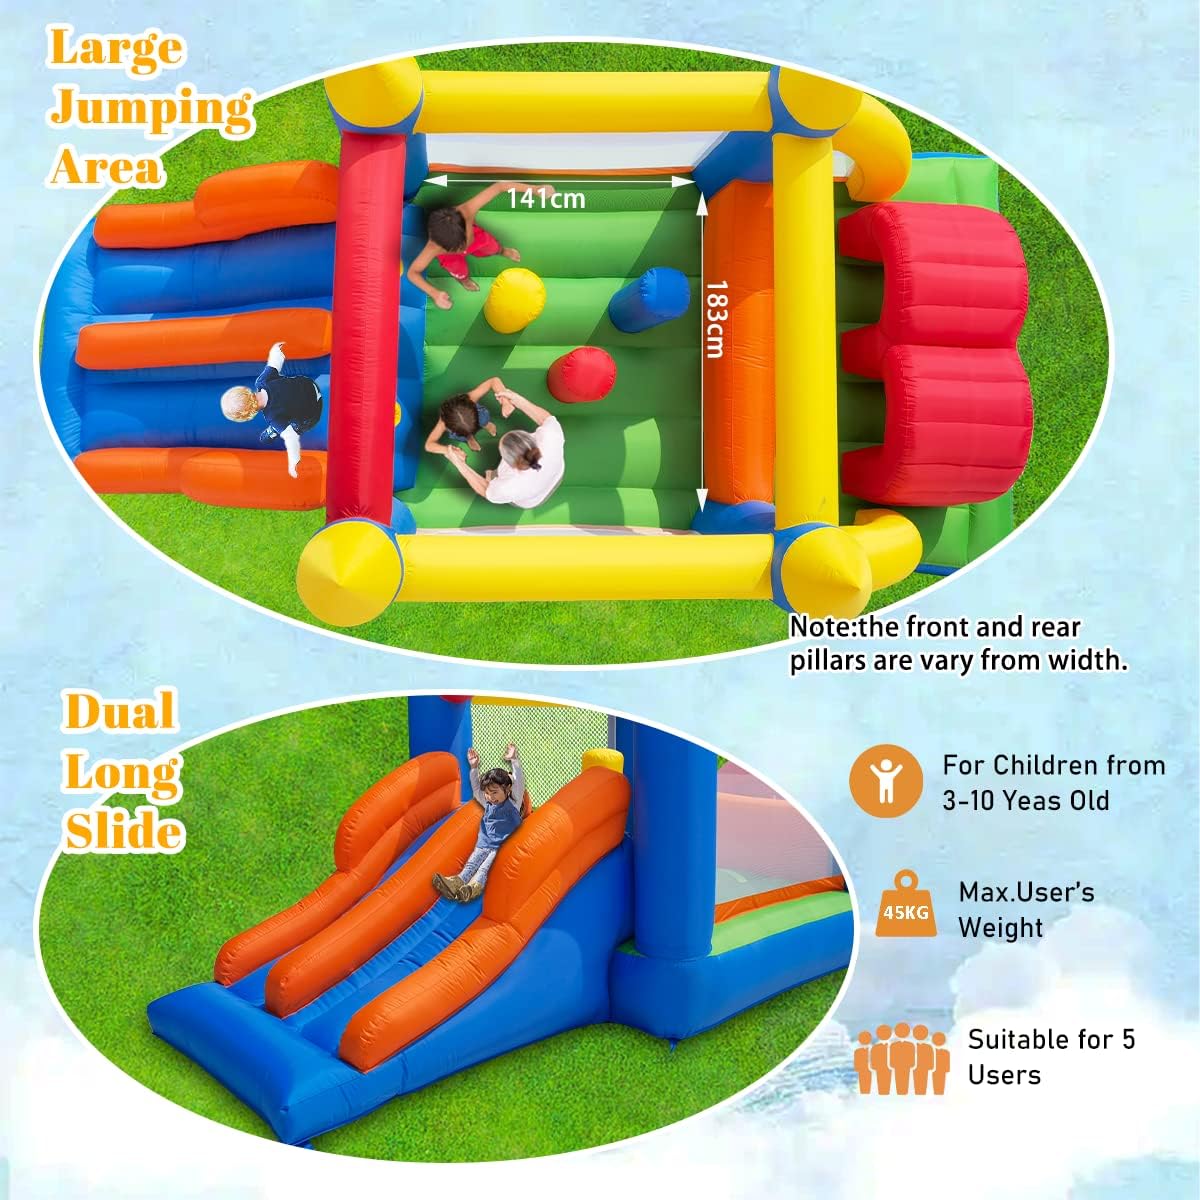 Ballsea Inflatable Bouncy Castle, Kids Bounce House Inflatable Trampoline Dual Slide, Inflatable Jumper Play Center with Air Blower for Kids Indoor Outdoor, 4.88 x 2.4 x 1.9m